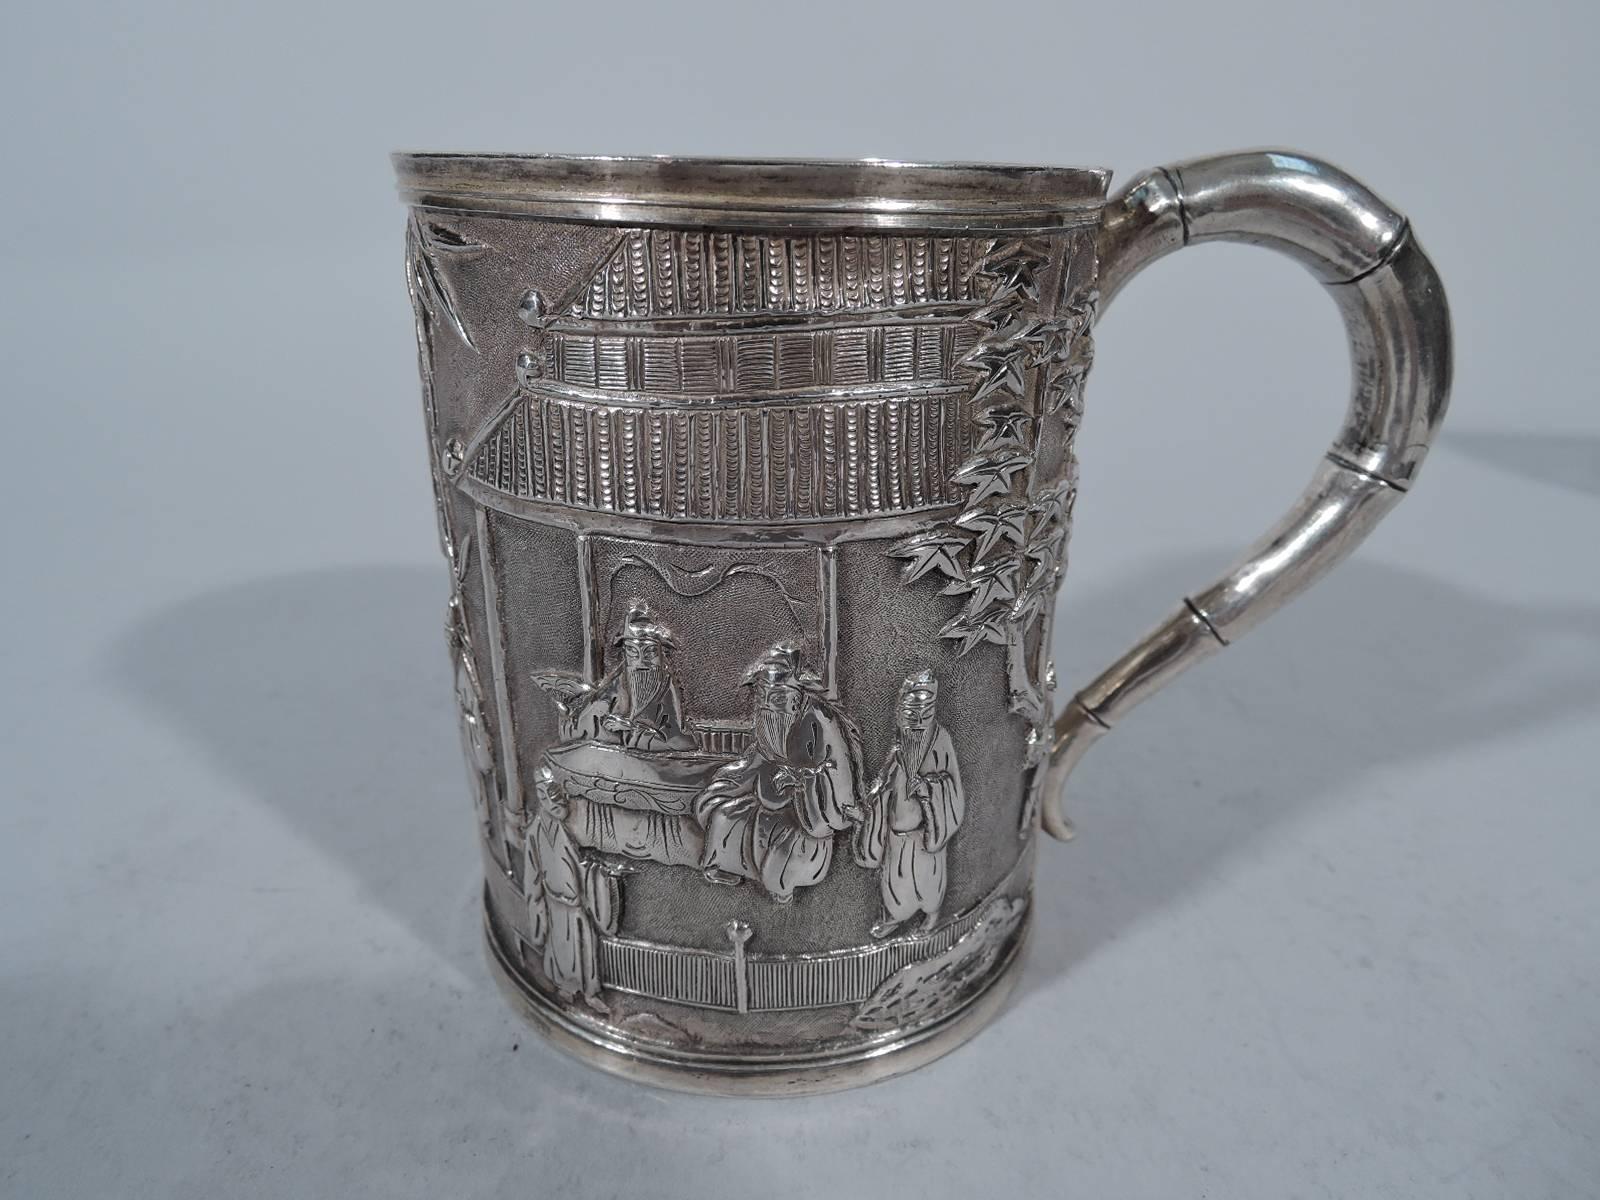 Chinese export silver mug, circa 1890. Straight sides with chased and repousse scenes of daily life, including robed greybeards, pavilions and bamboo. A sweet deployment of exotic motifs. The scrolled bamboo handle completes the look. Armorial frame